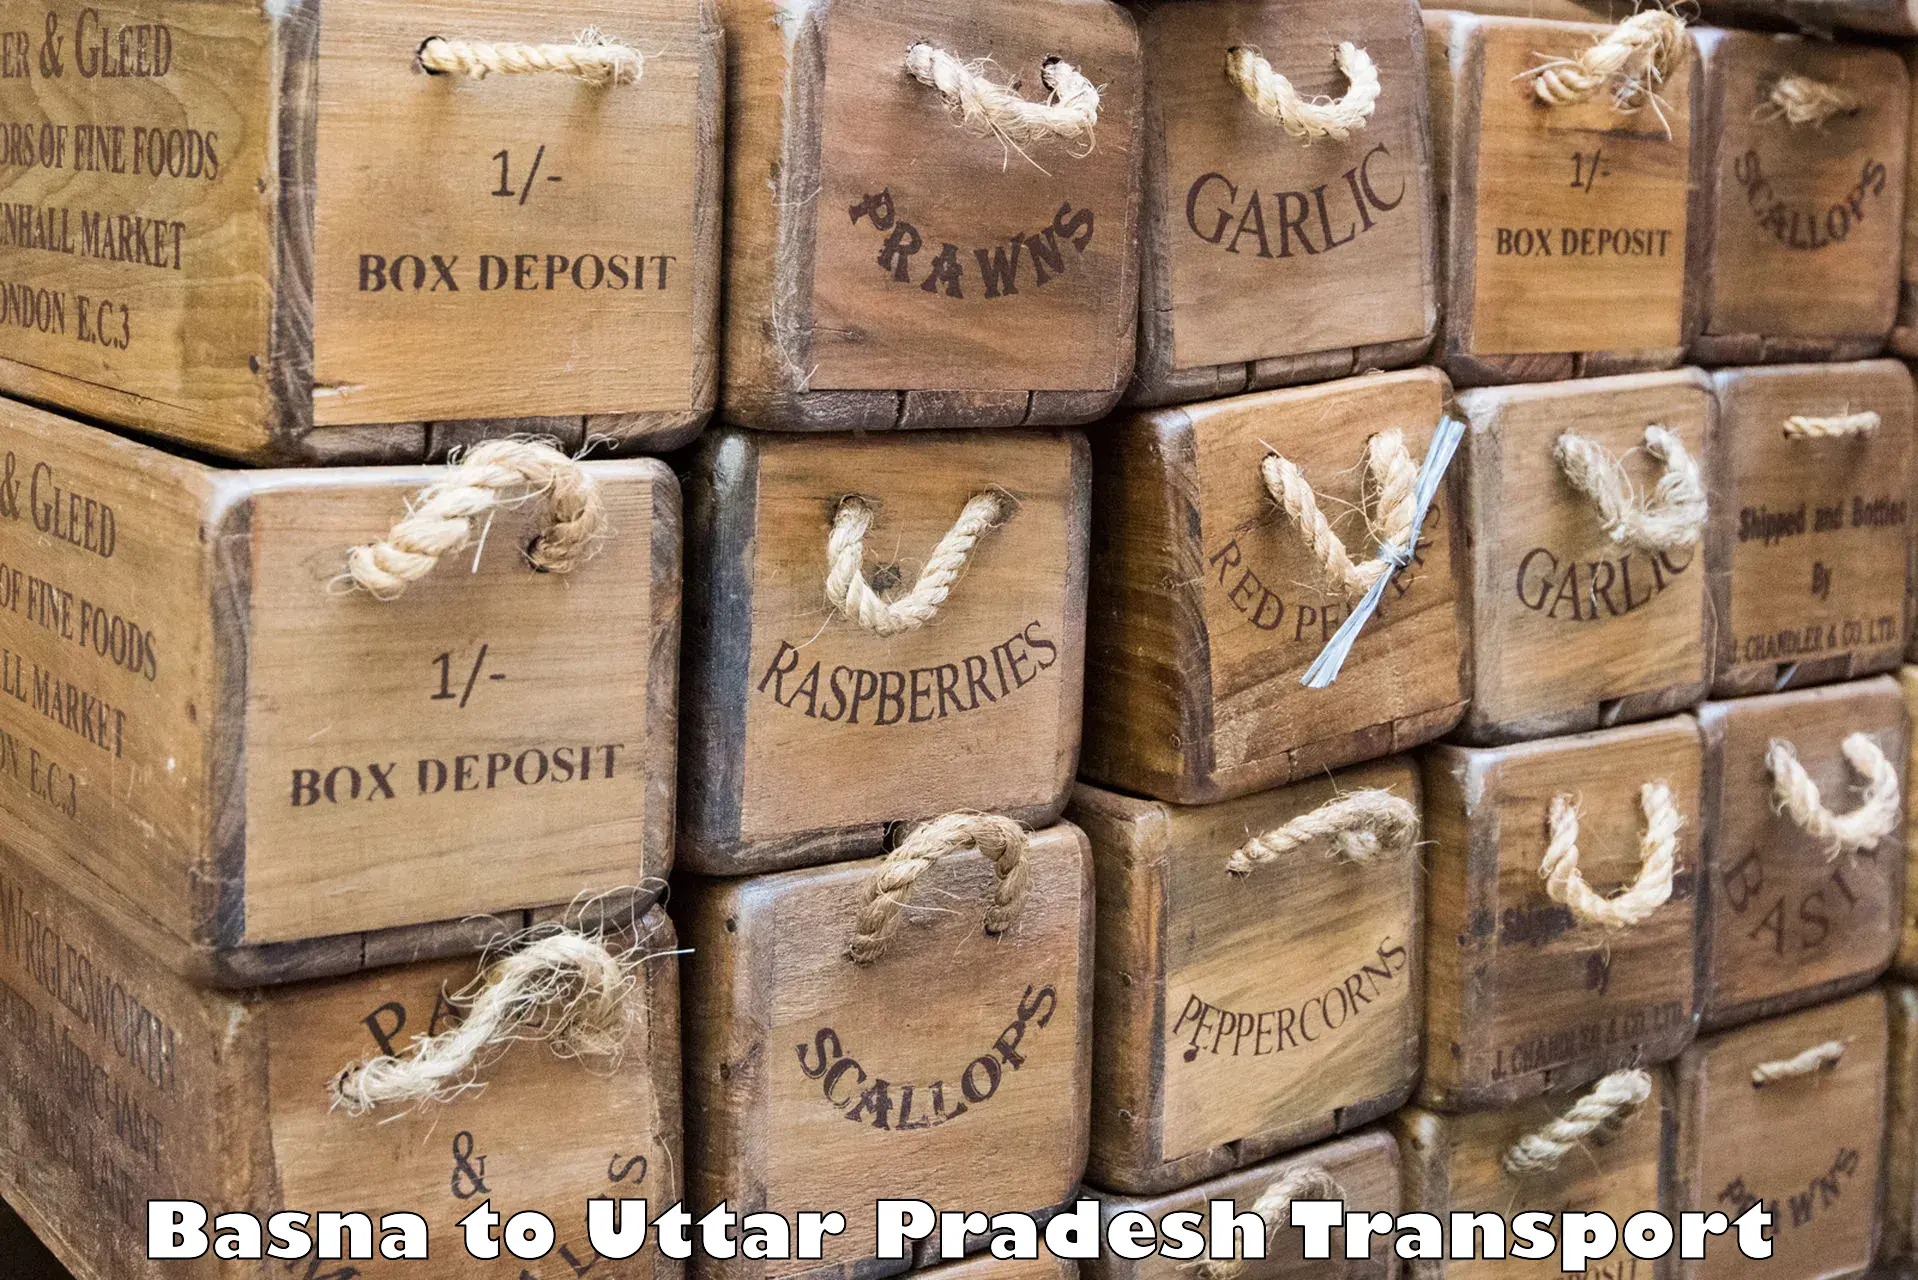 Furniture transport service Basna to Allahabad